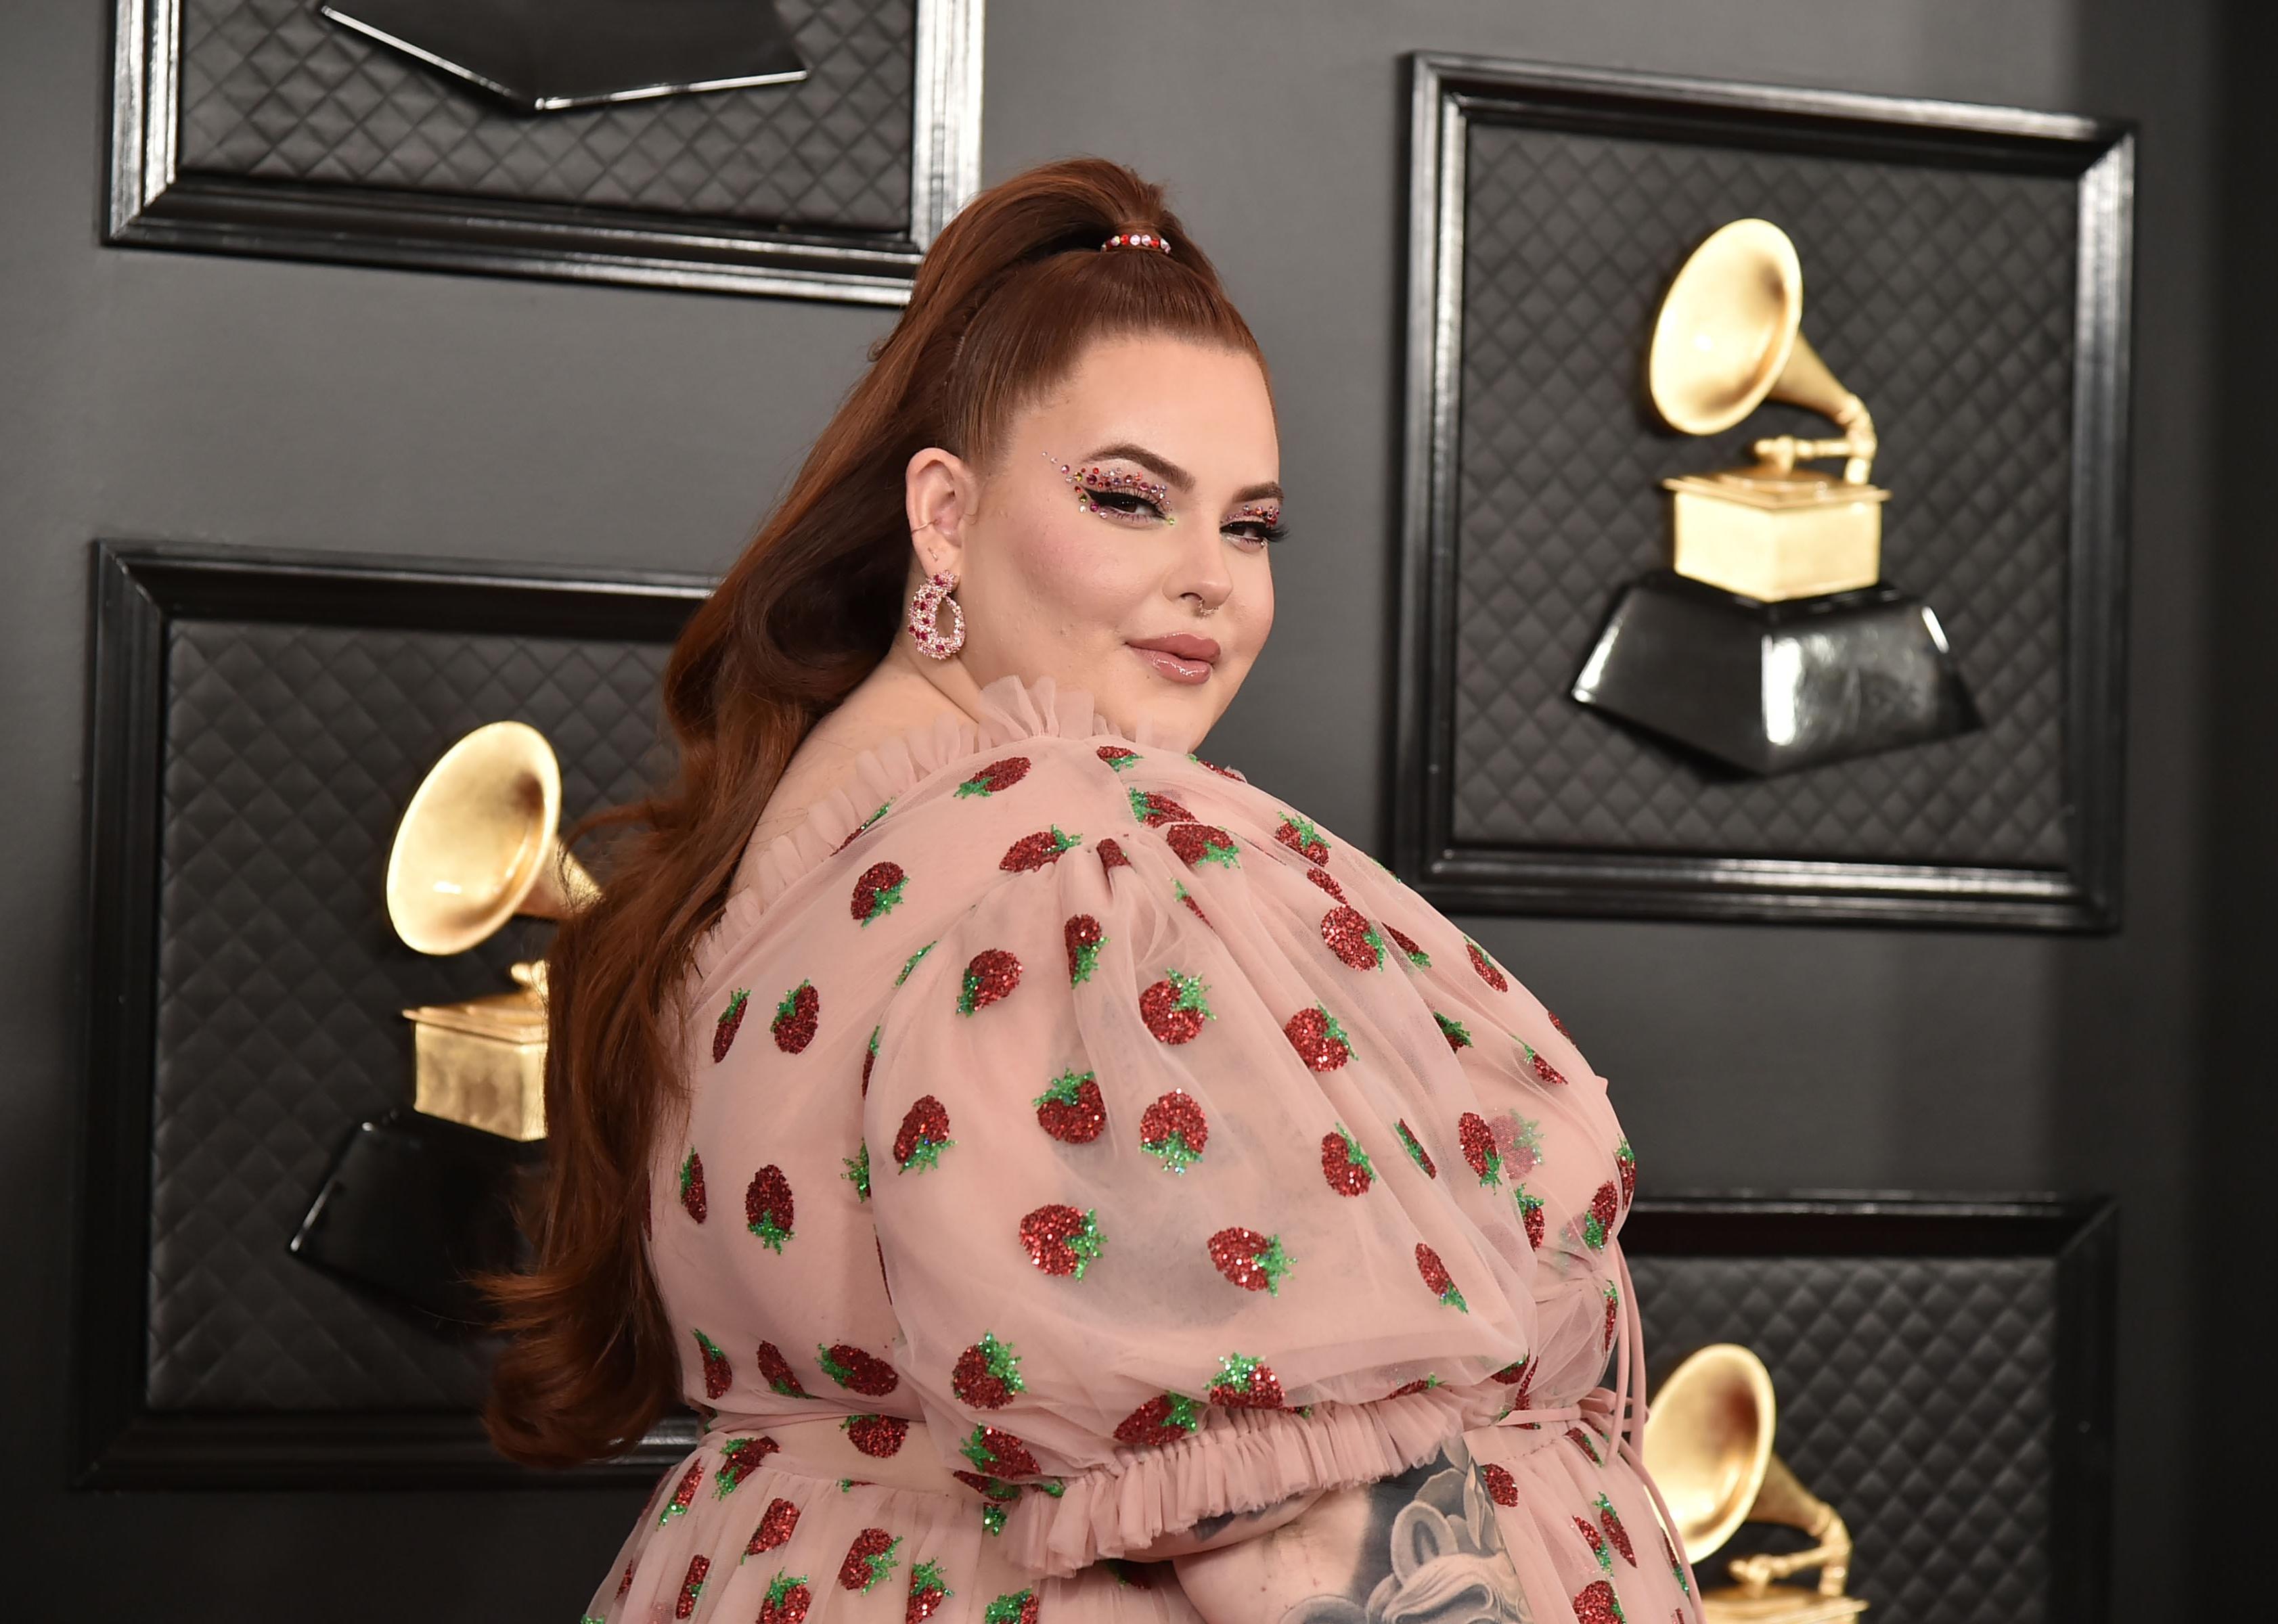 Tess Holliday attends the 62nd Annual Grammy Awards.